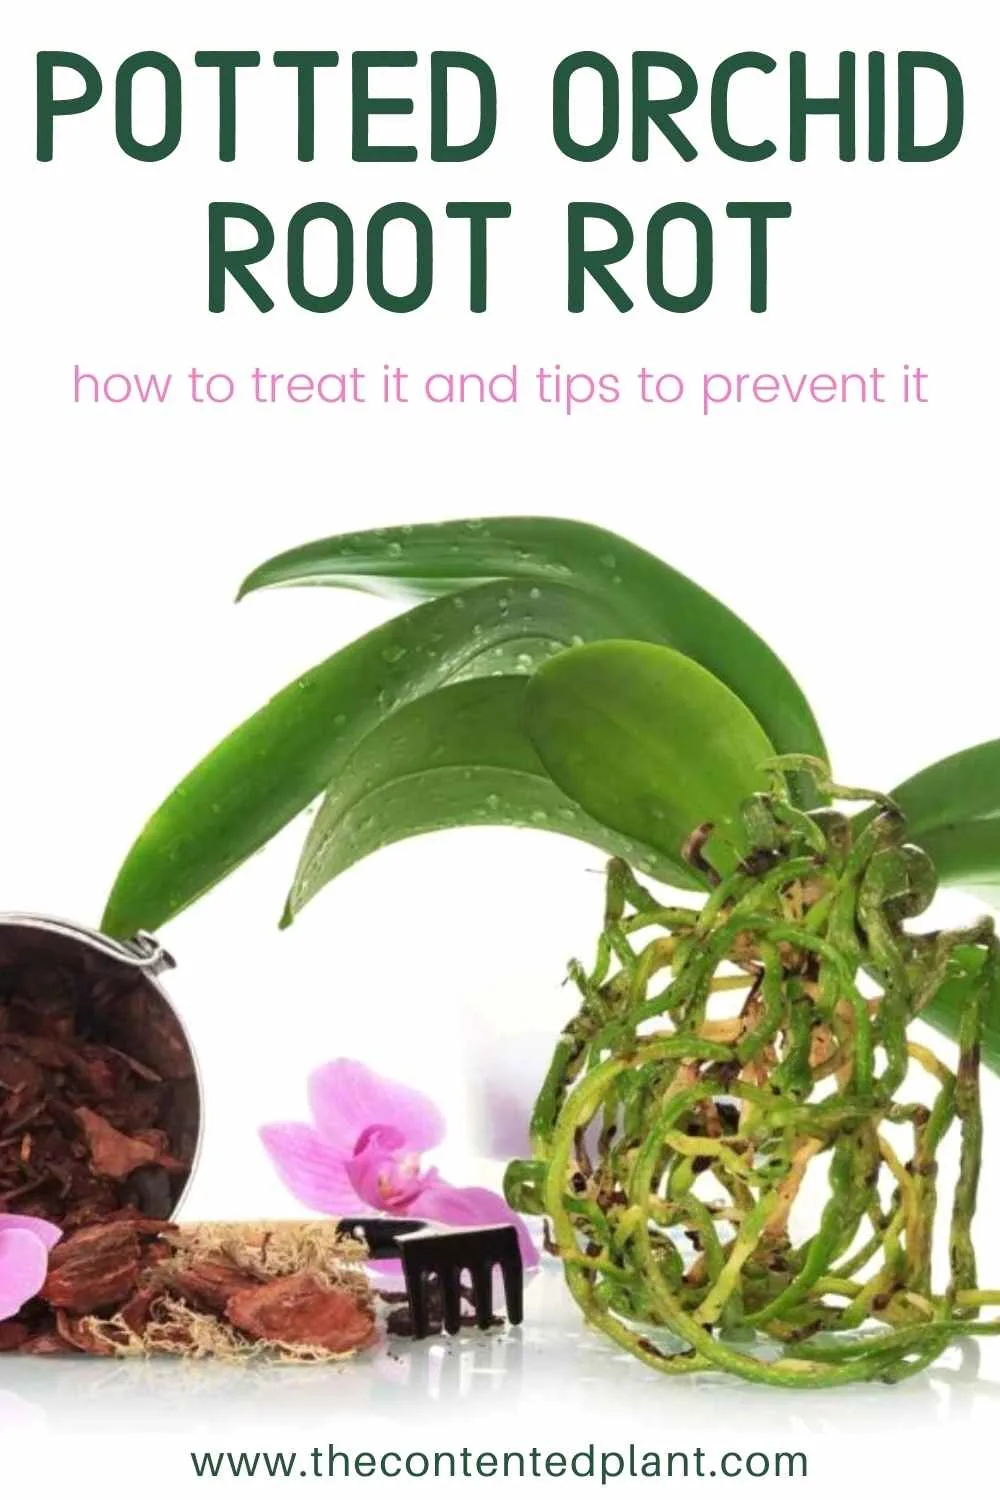 Potted orchid root rot-pin image